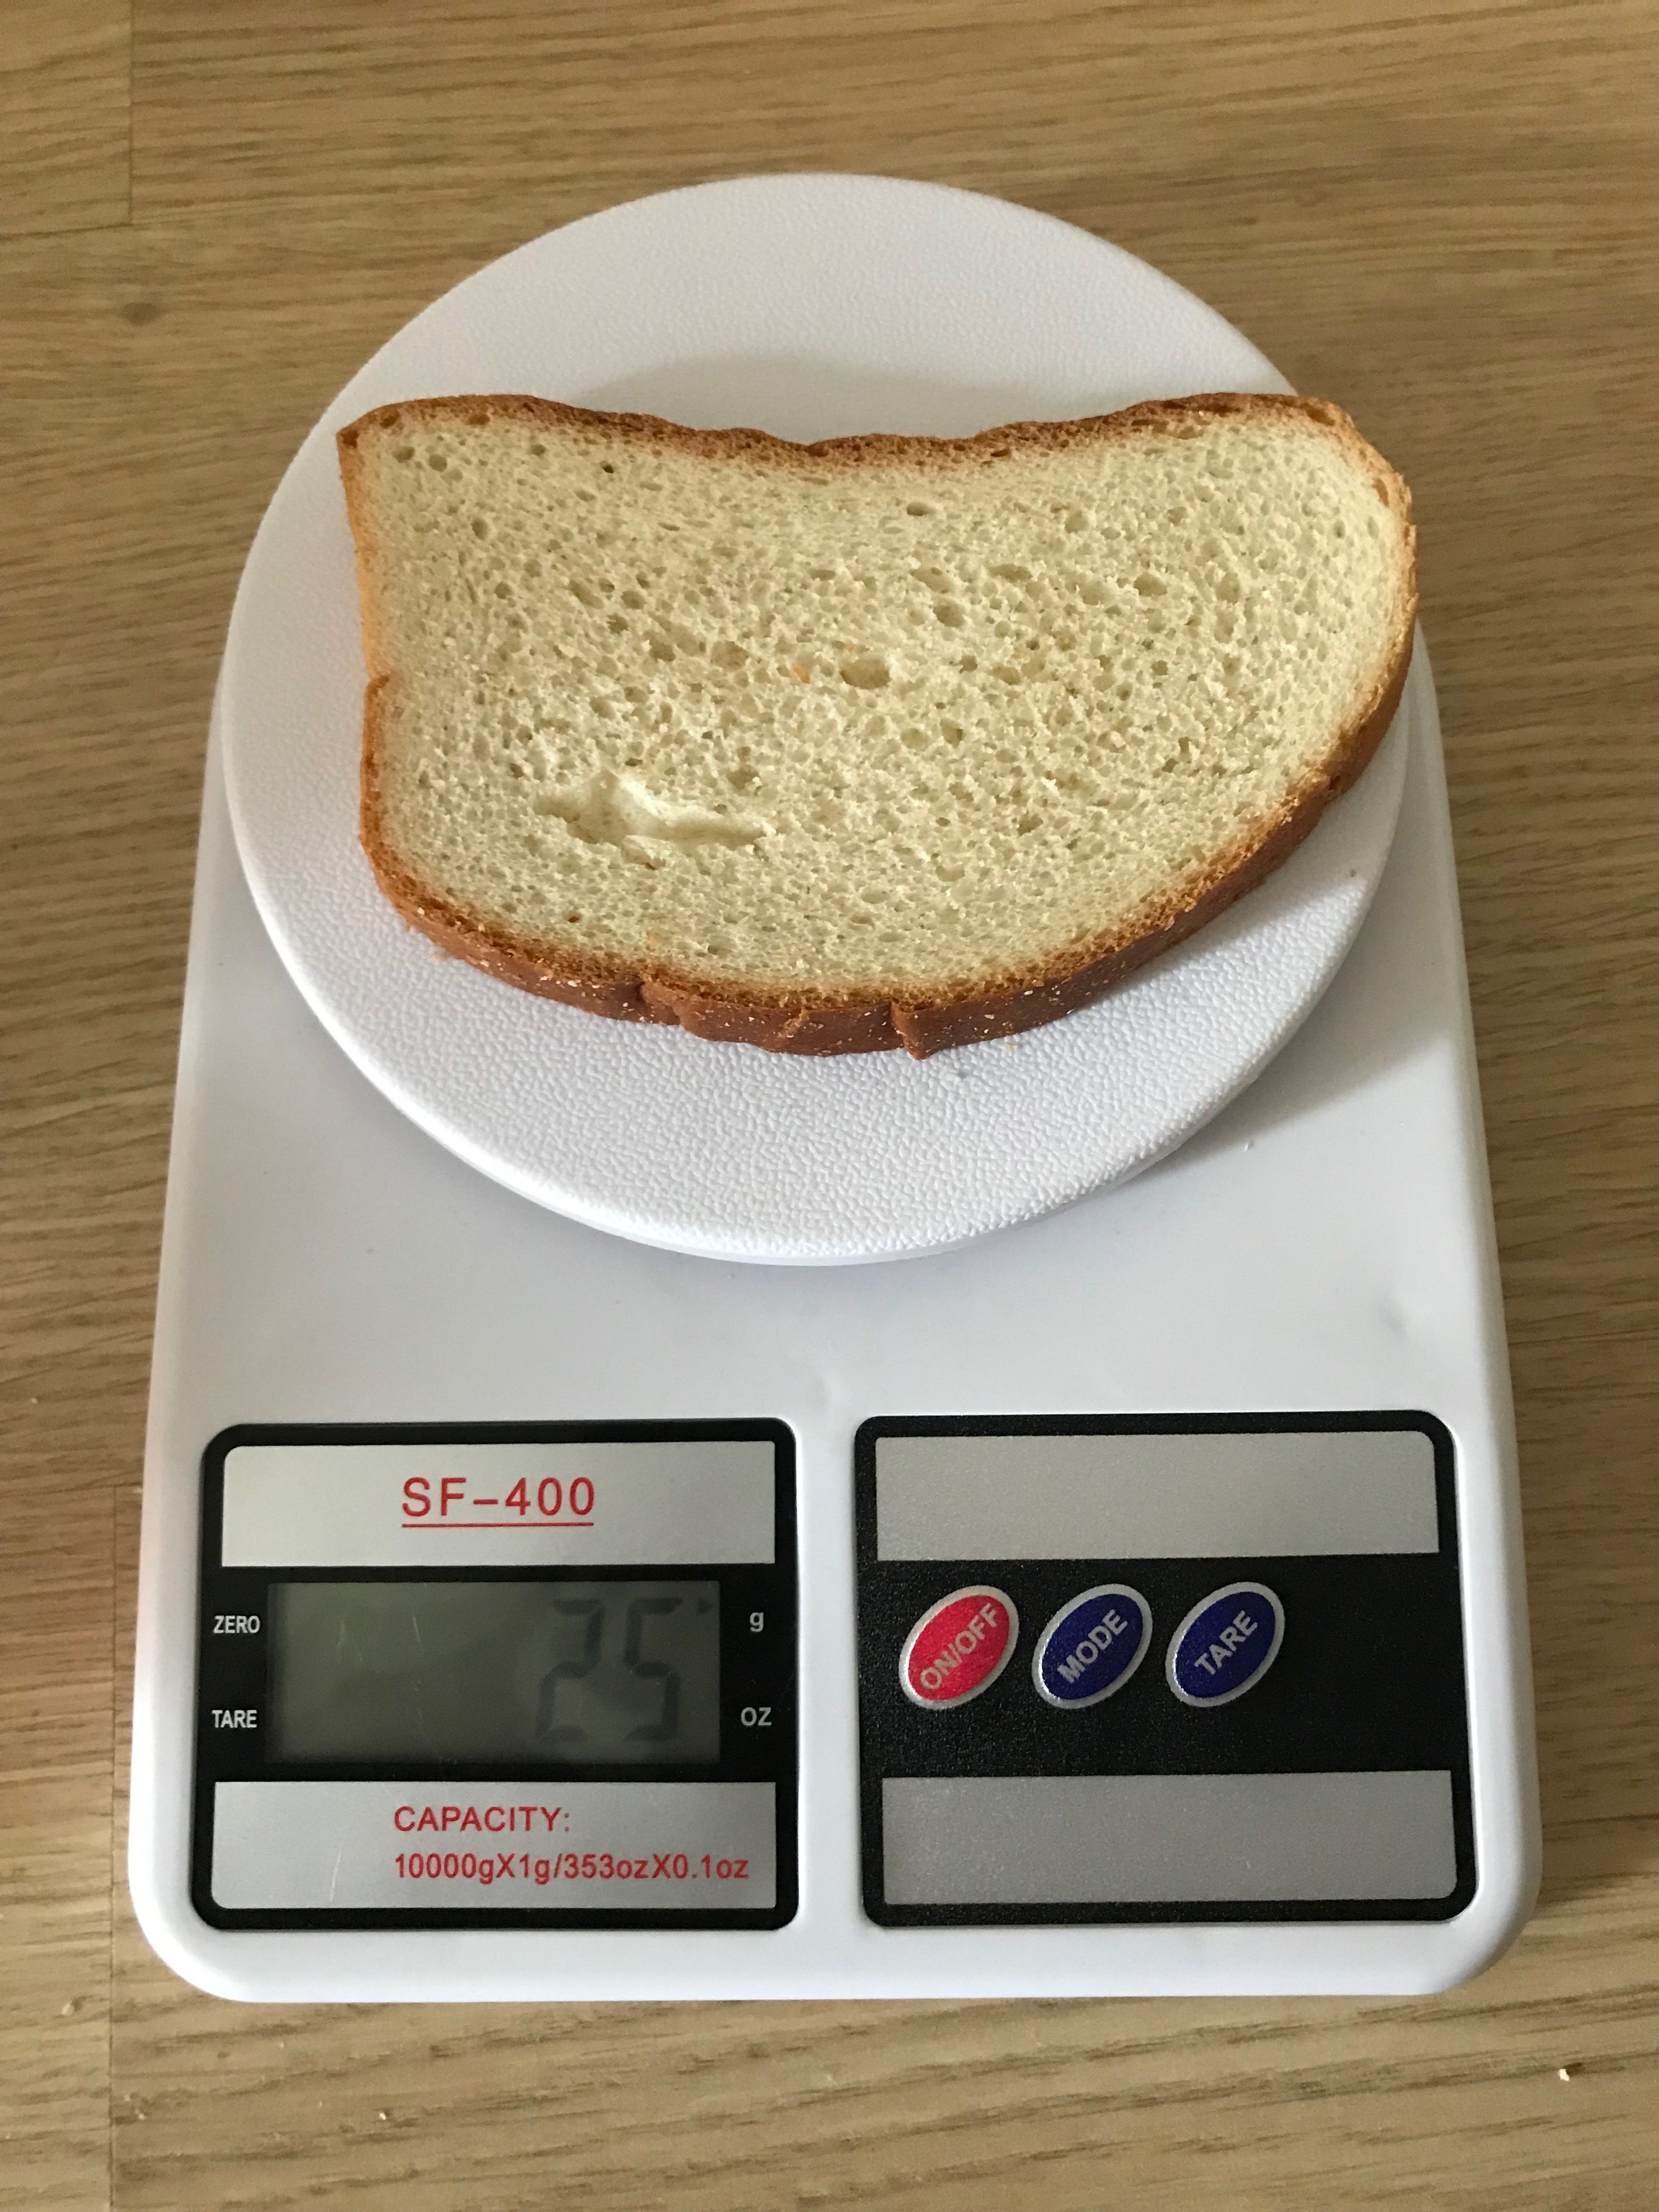 How much does a slice of white bread weigh?